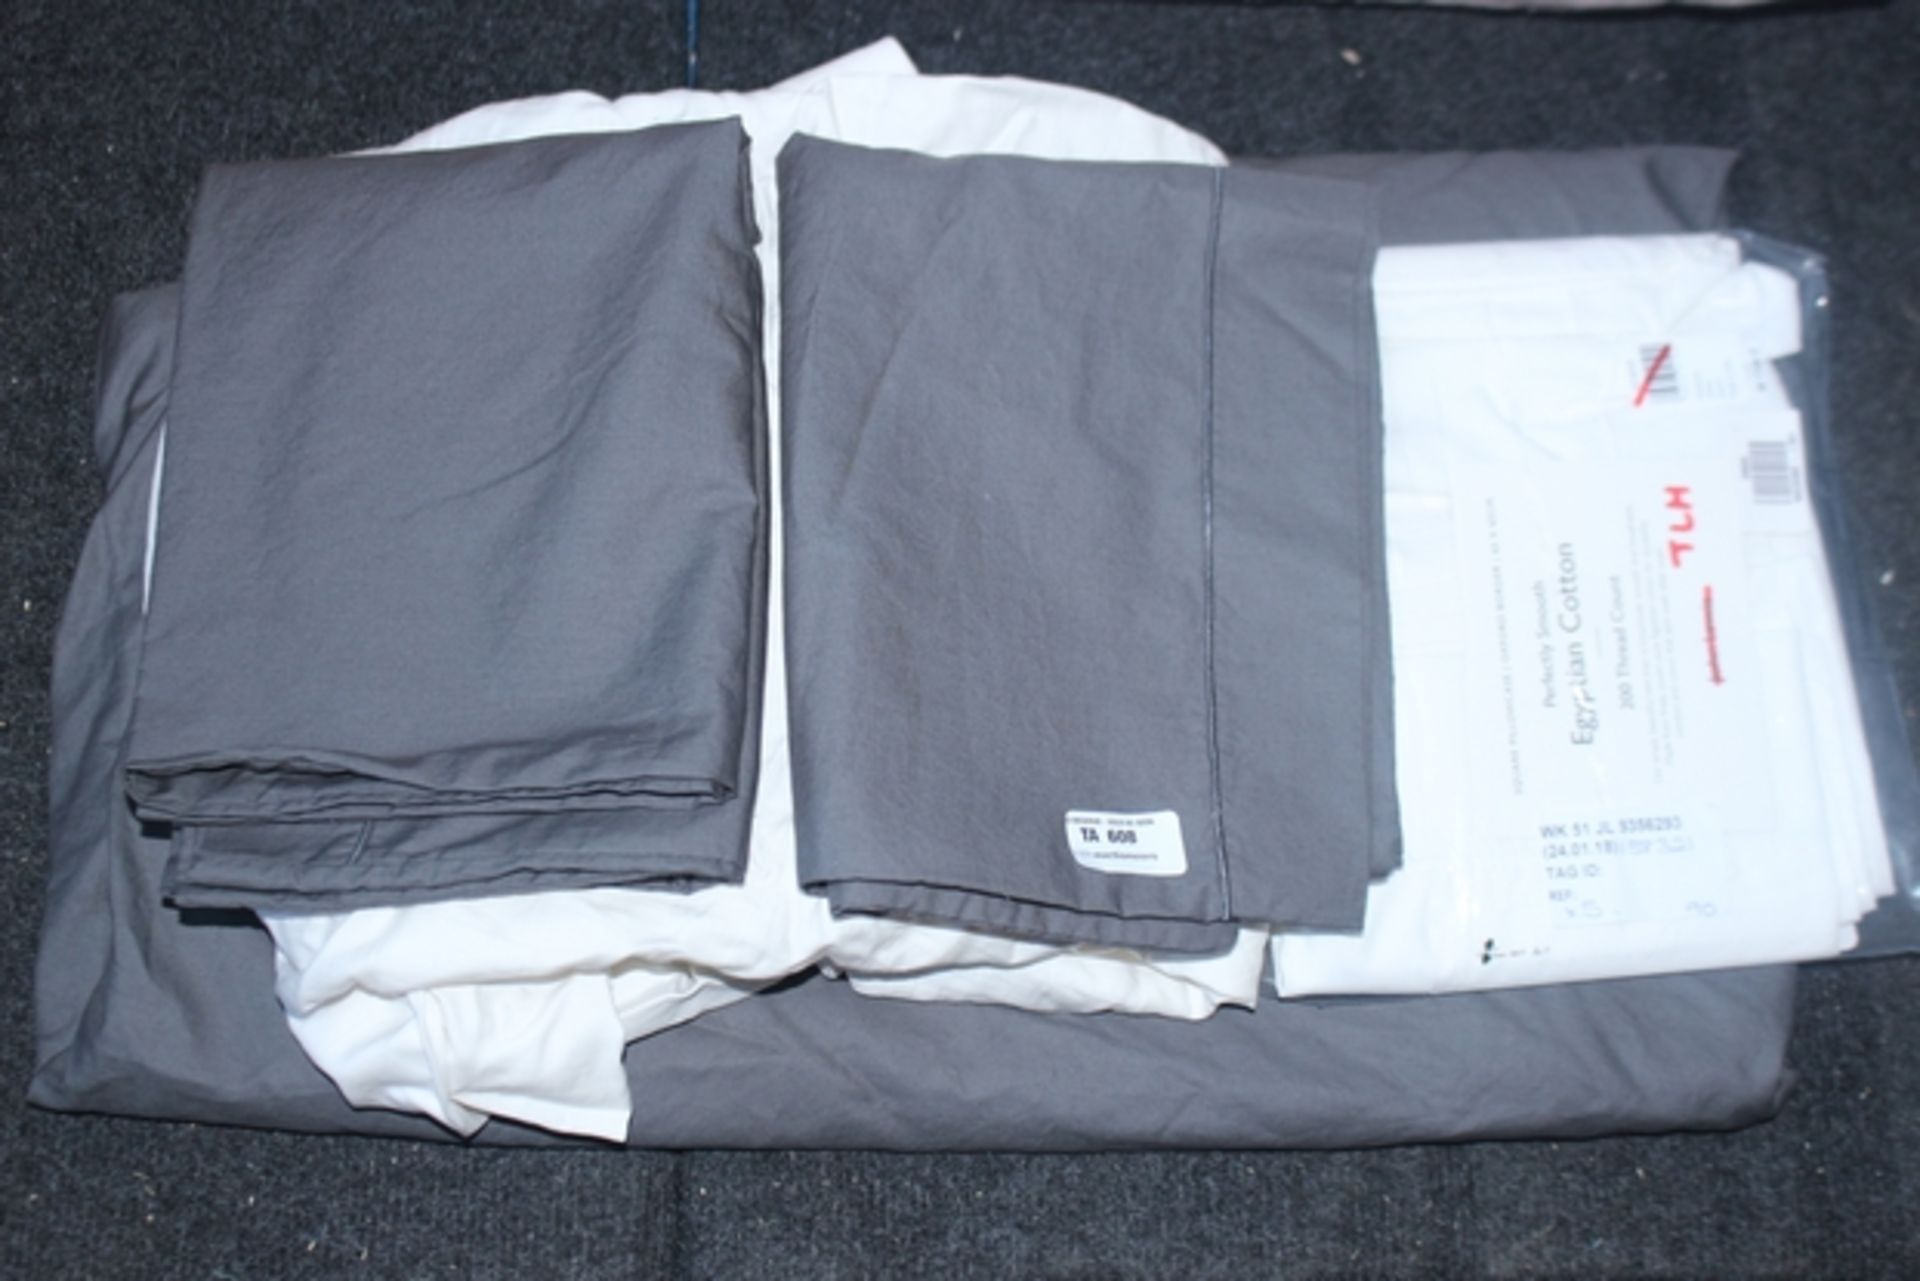 1X LOT TO CONTAIN 5 ASSORTED SHEETS/PILLOW CASES RRP £80 (24/01/18)